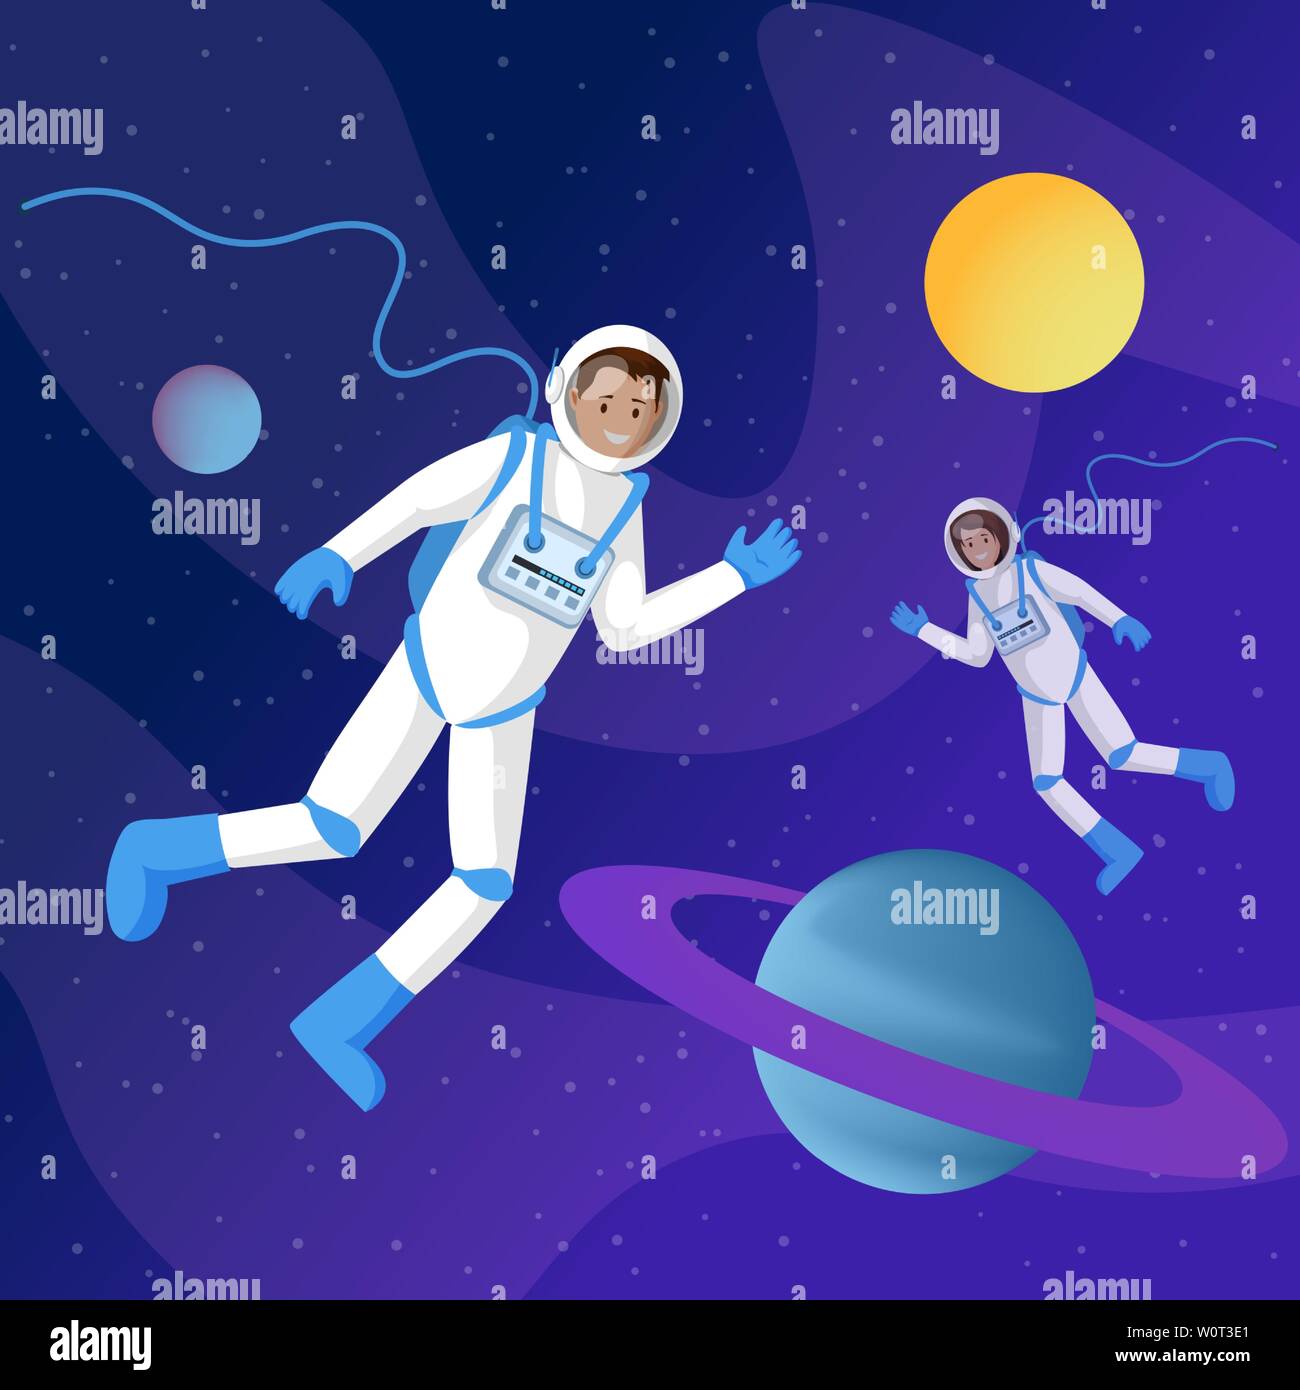 Astronauts In Outer Space Flat Illustration Two Cosmonauts In